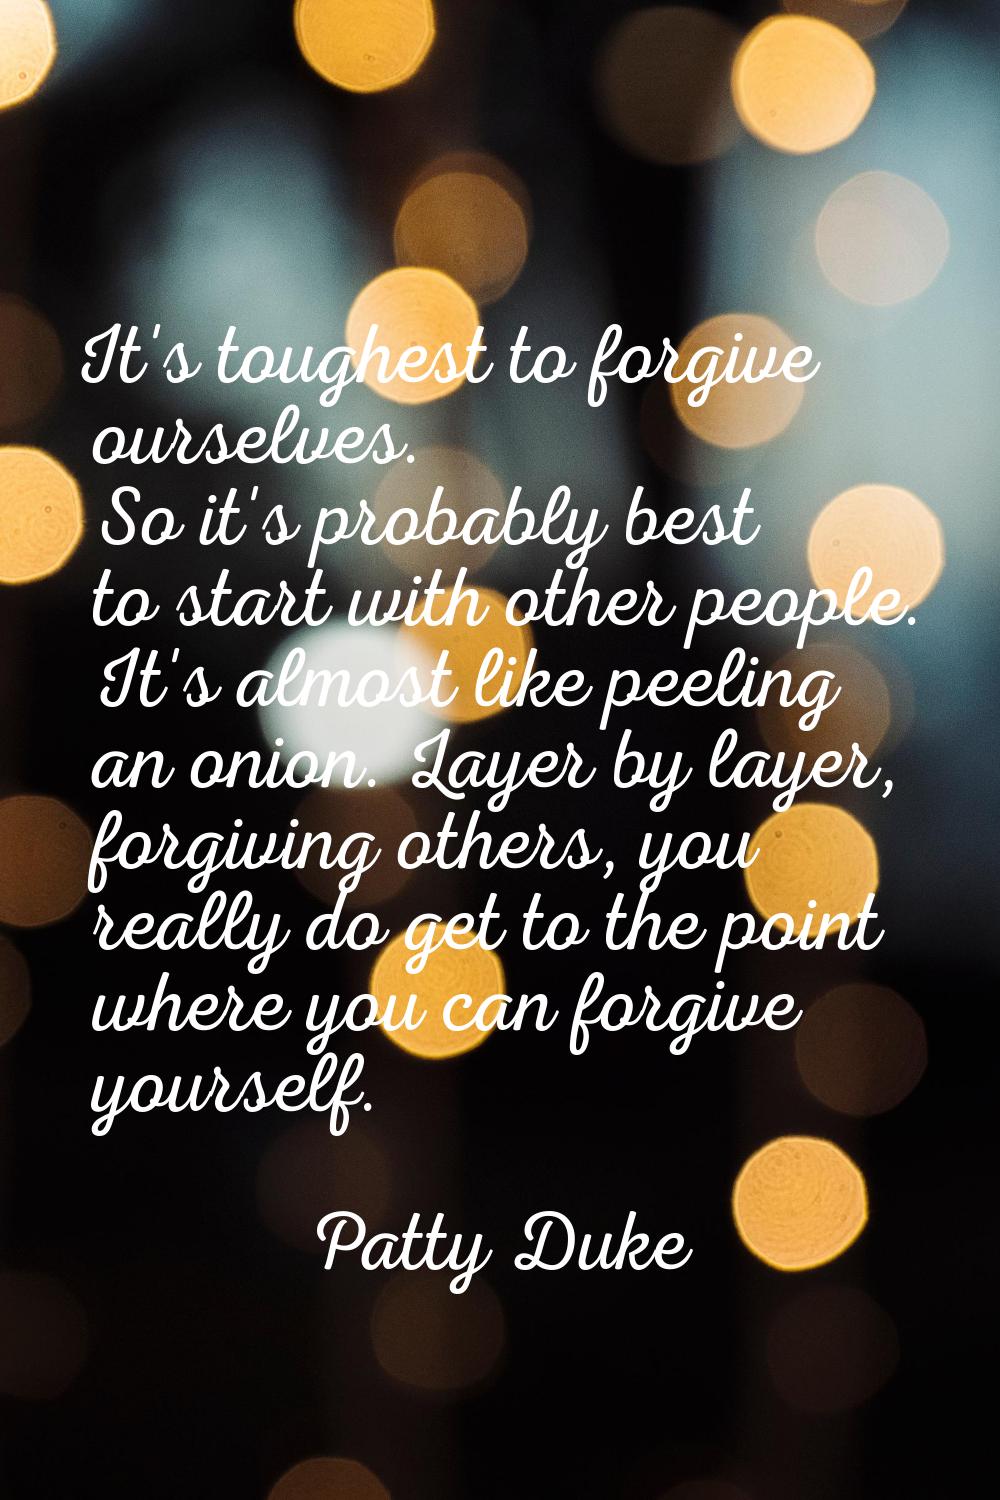 It's toughest to forgive ourselves. So it's probably best to start with other people. It's almost l